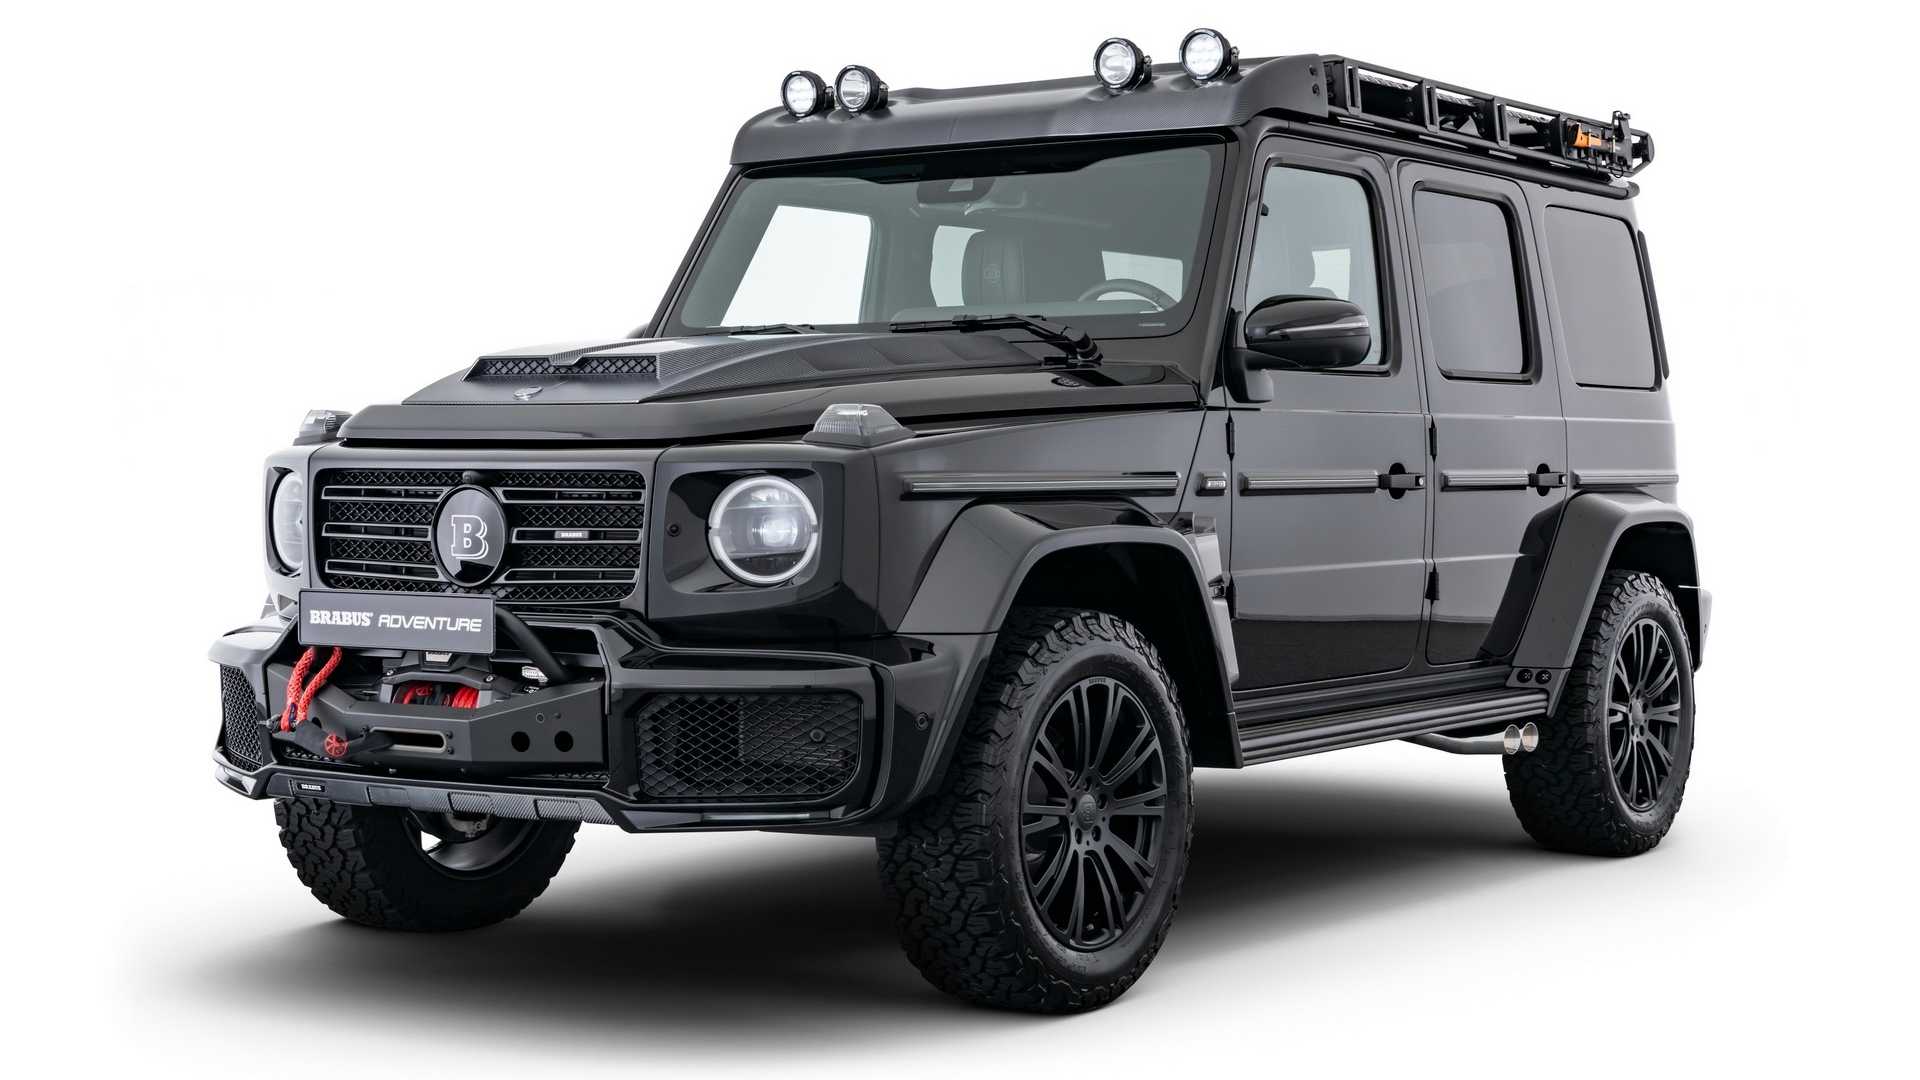 Mercedes G-Class With Brabus Adventure Package